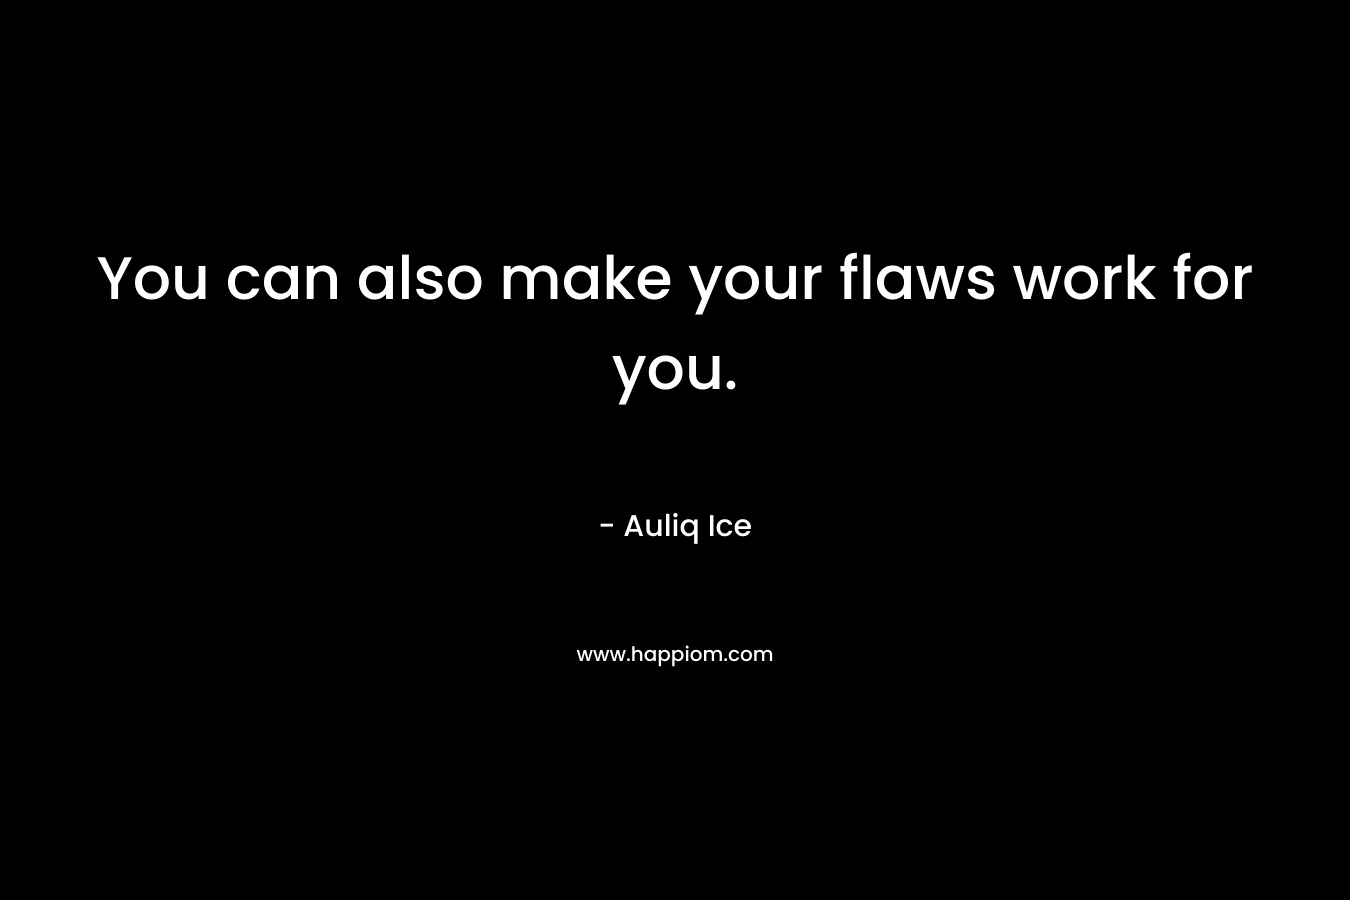 You can also make your flaws work for you.